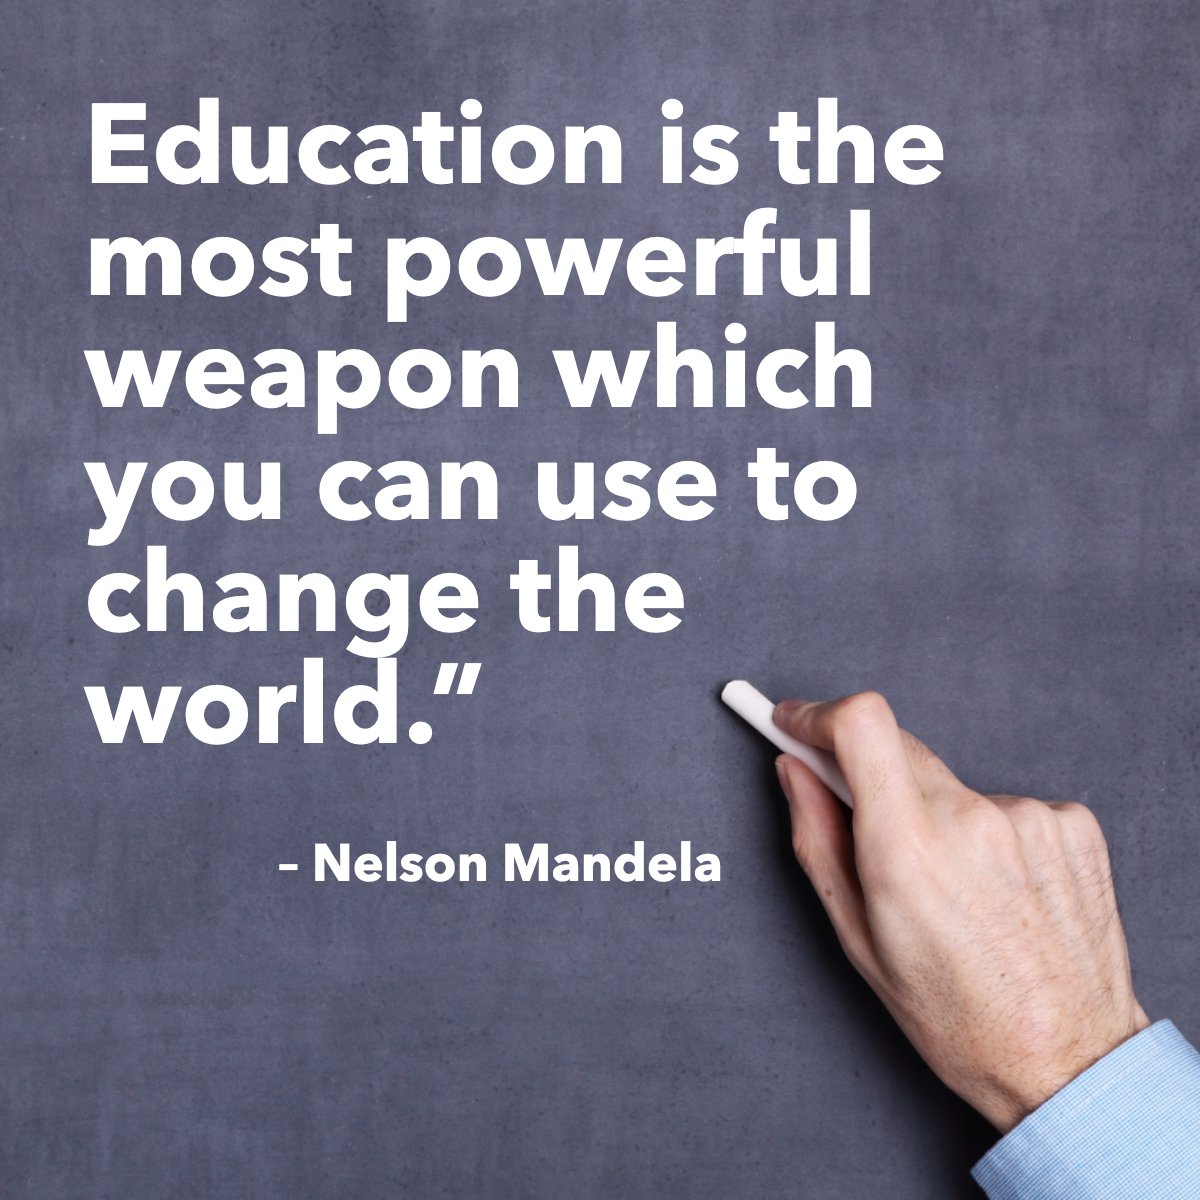 'Education is the most powerful weapon which you can use to change the world' 
— Nelson Mandela  📖

#educationquotes #wisdomquote #wisdomoftheday #quotegram #quoteoftheday #nelsonmandela #educationispower
 #15westhomes